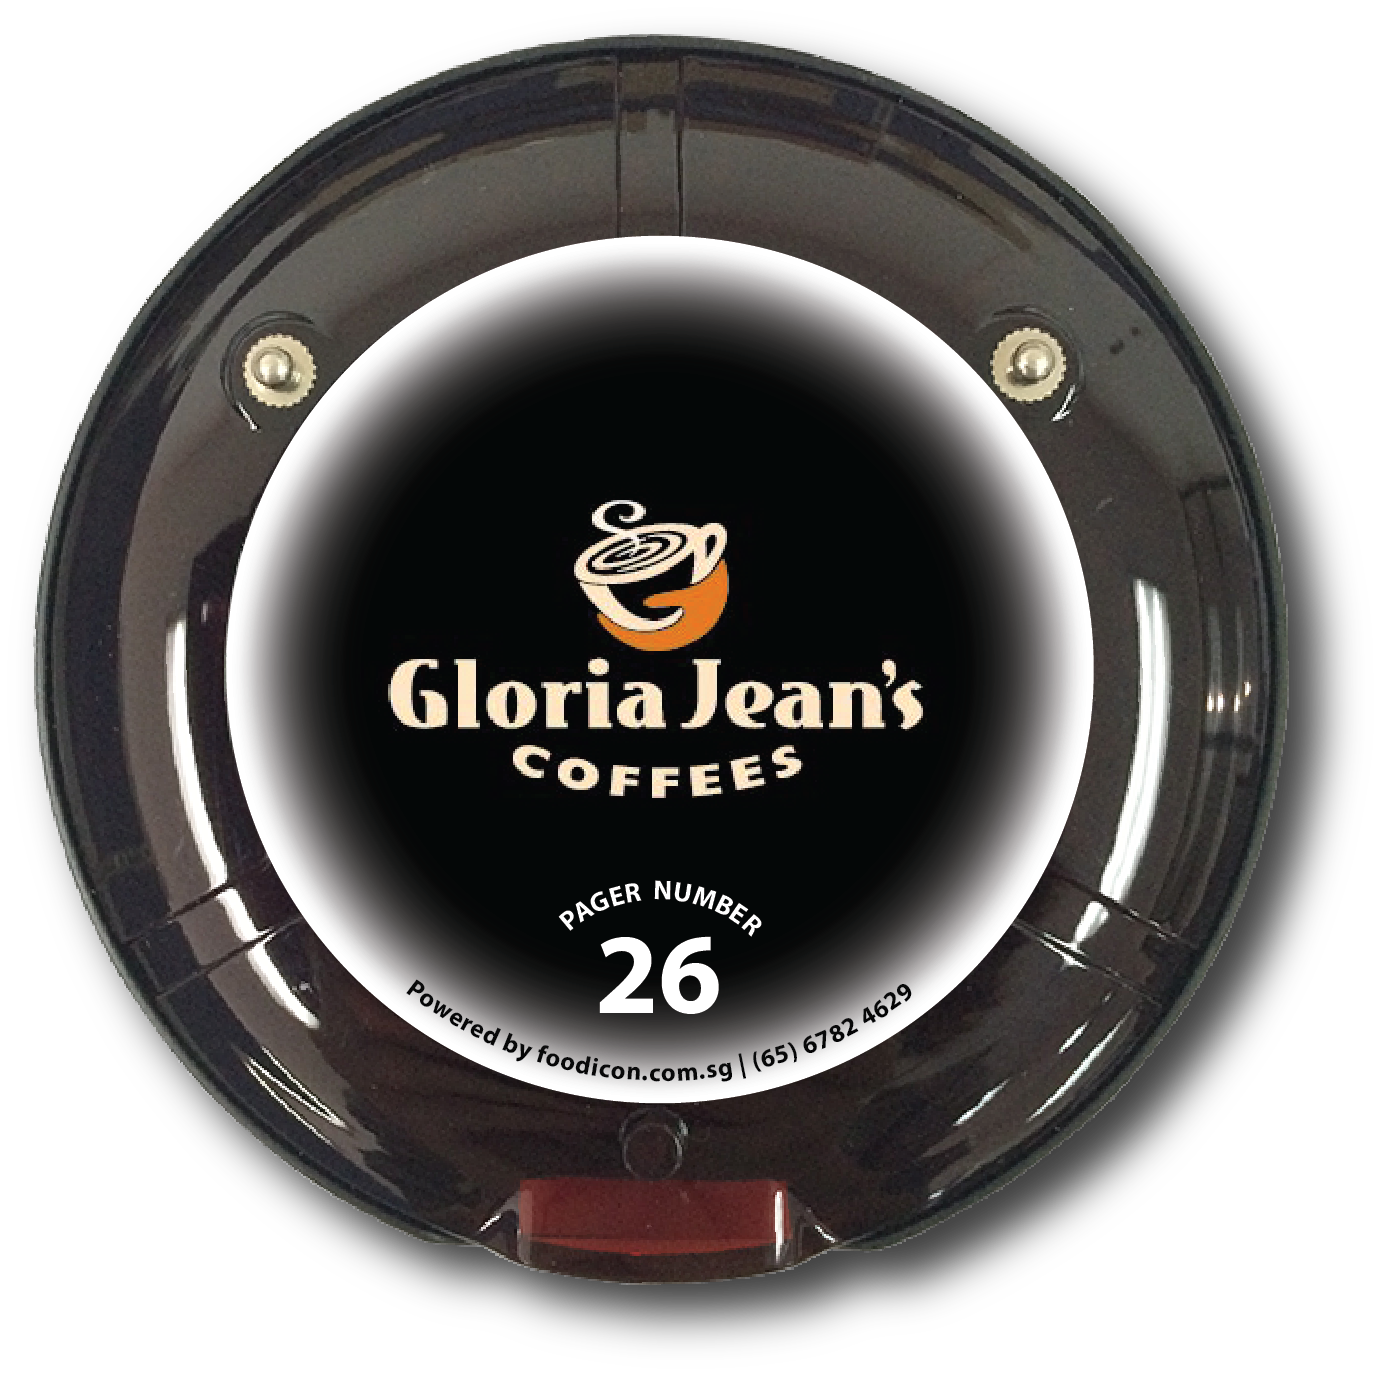 Food Icon Paging System - Gloria Jean Coffee